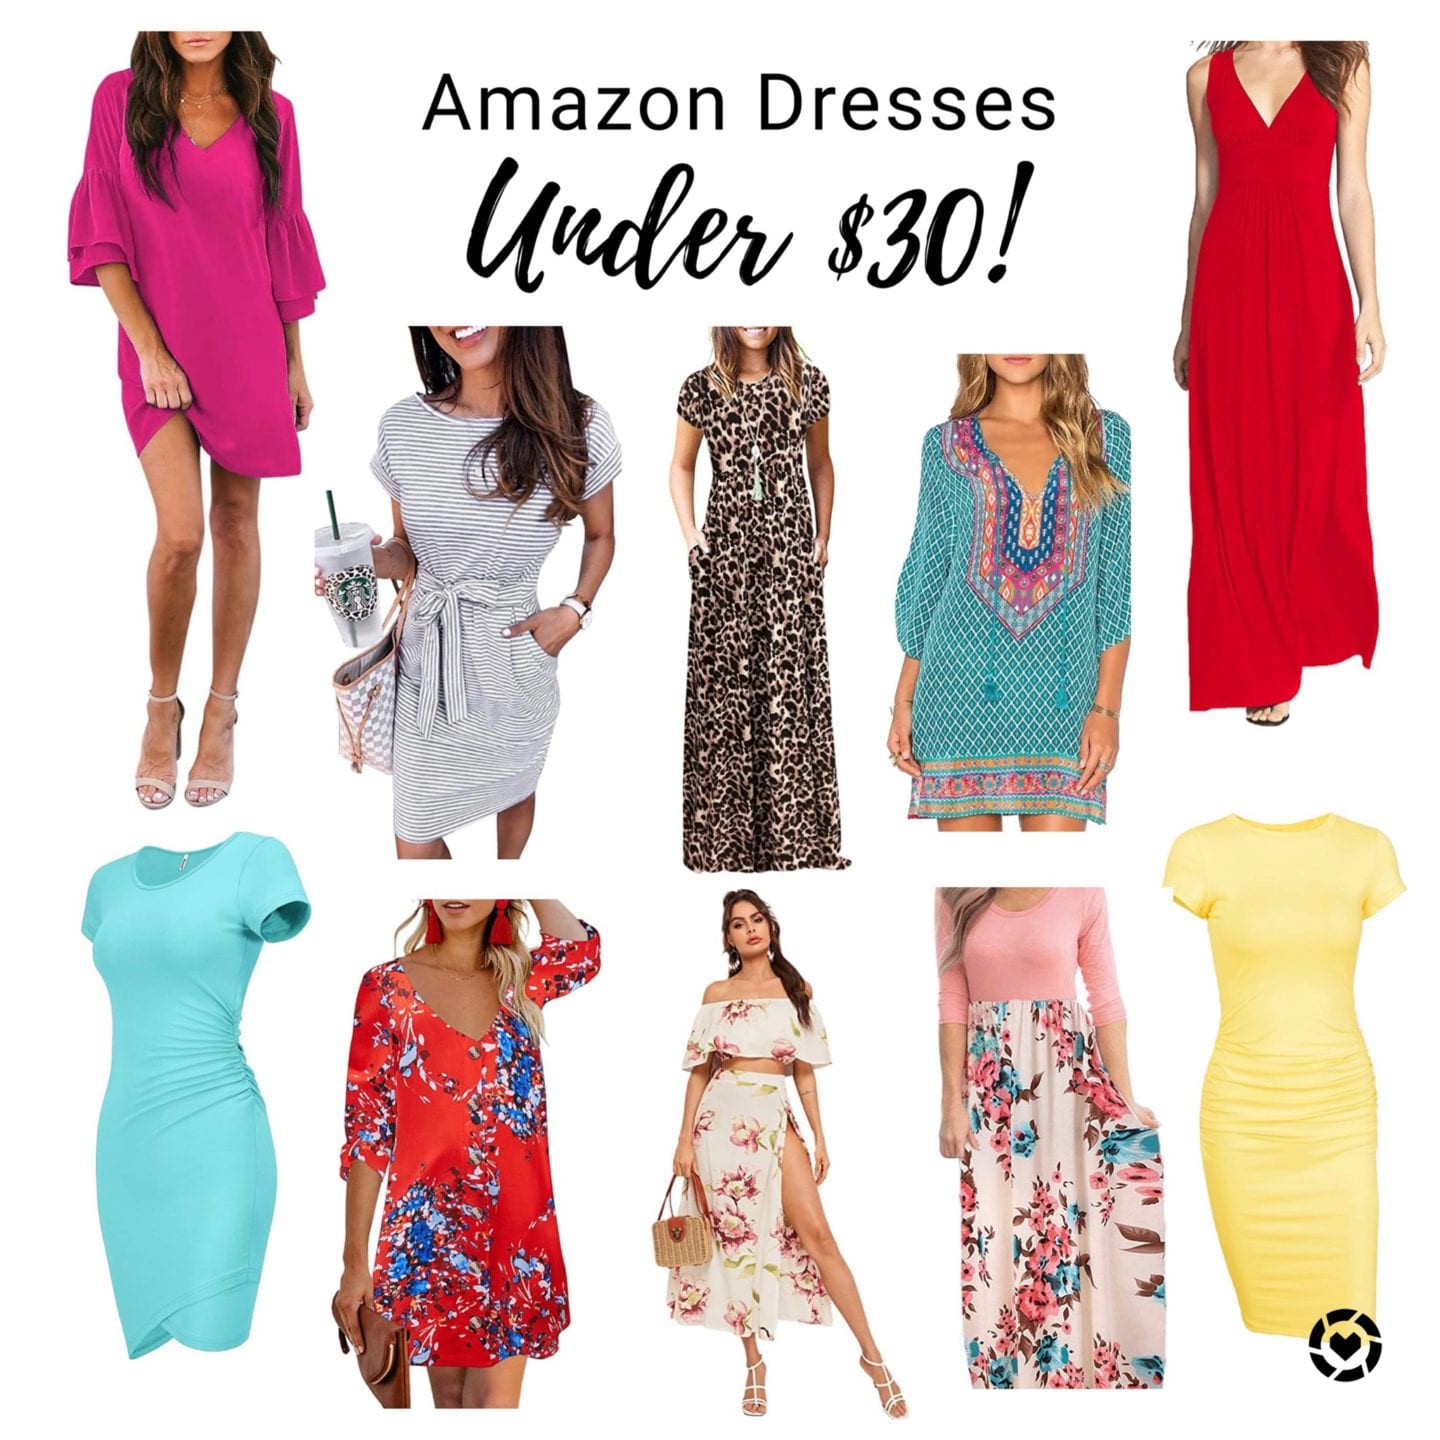 Amazon Dresses for Under $30! Plus Accessories! - Life of a Cherry Wife